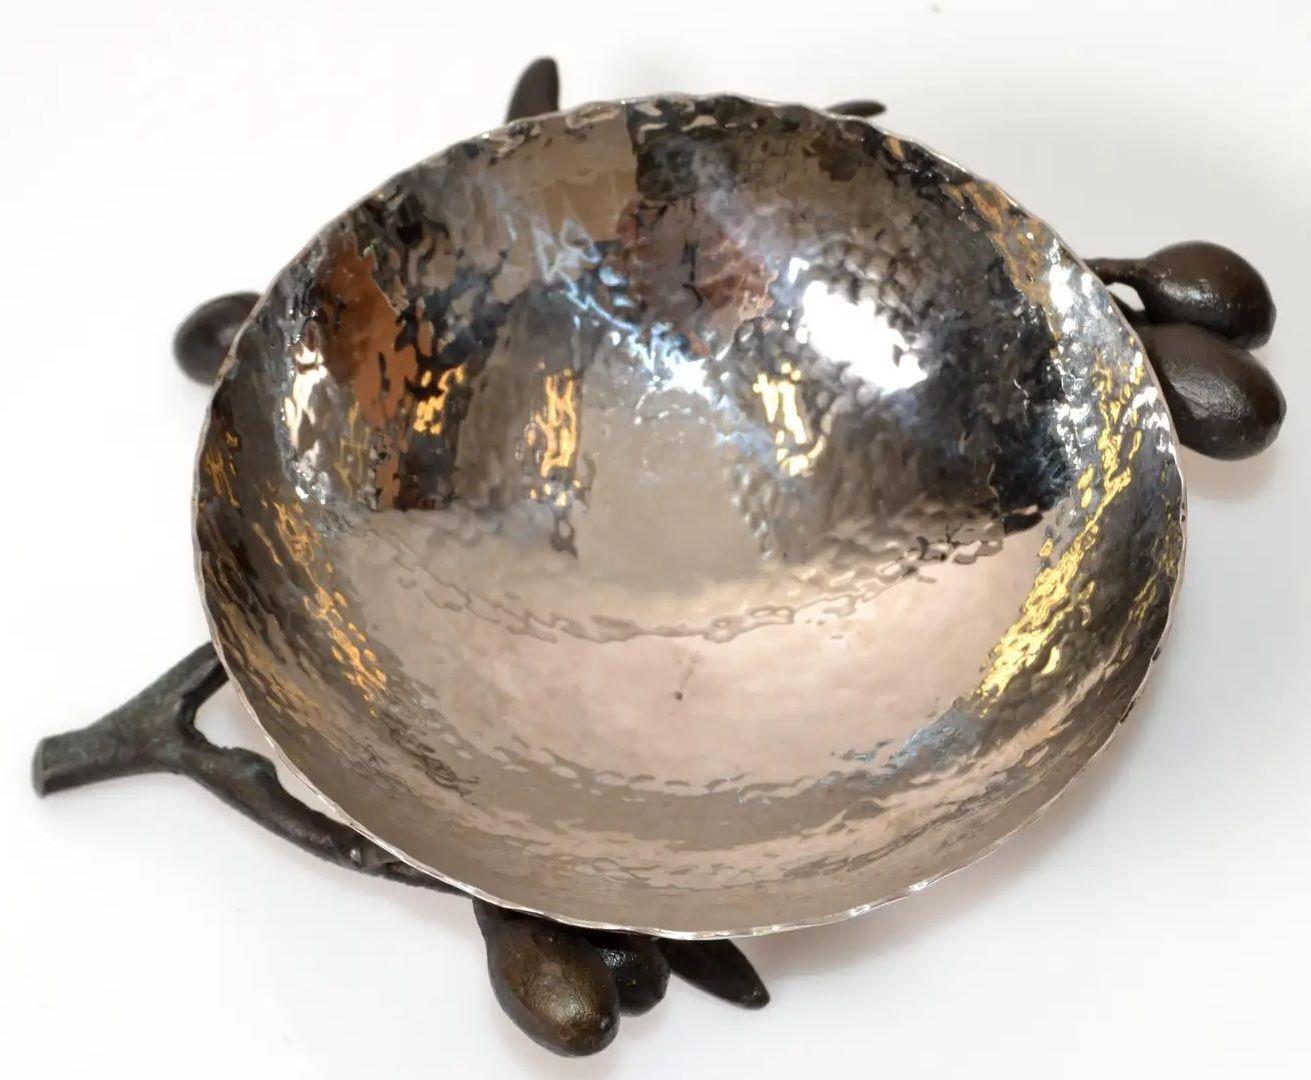 Michael Aram Olive Branch Silver Catch All Dish.Michael Aram Art Studio hand-hammered nickel plated bowl held up by a bronze olive tree branch. Elegant and great quality craftsmanship. Inscribed ARAM at the Base.The Olive Branch Collection takes its